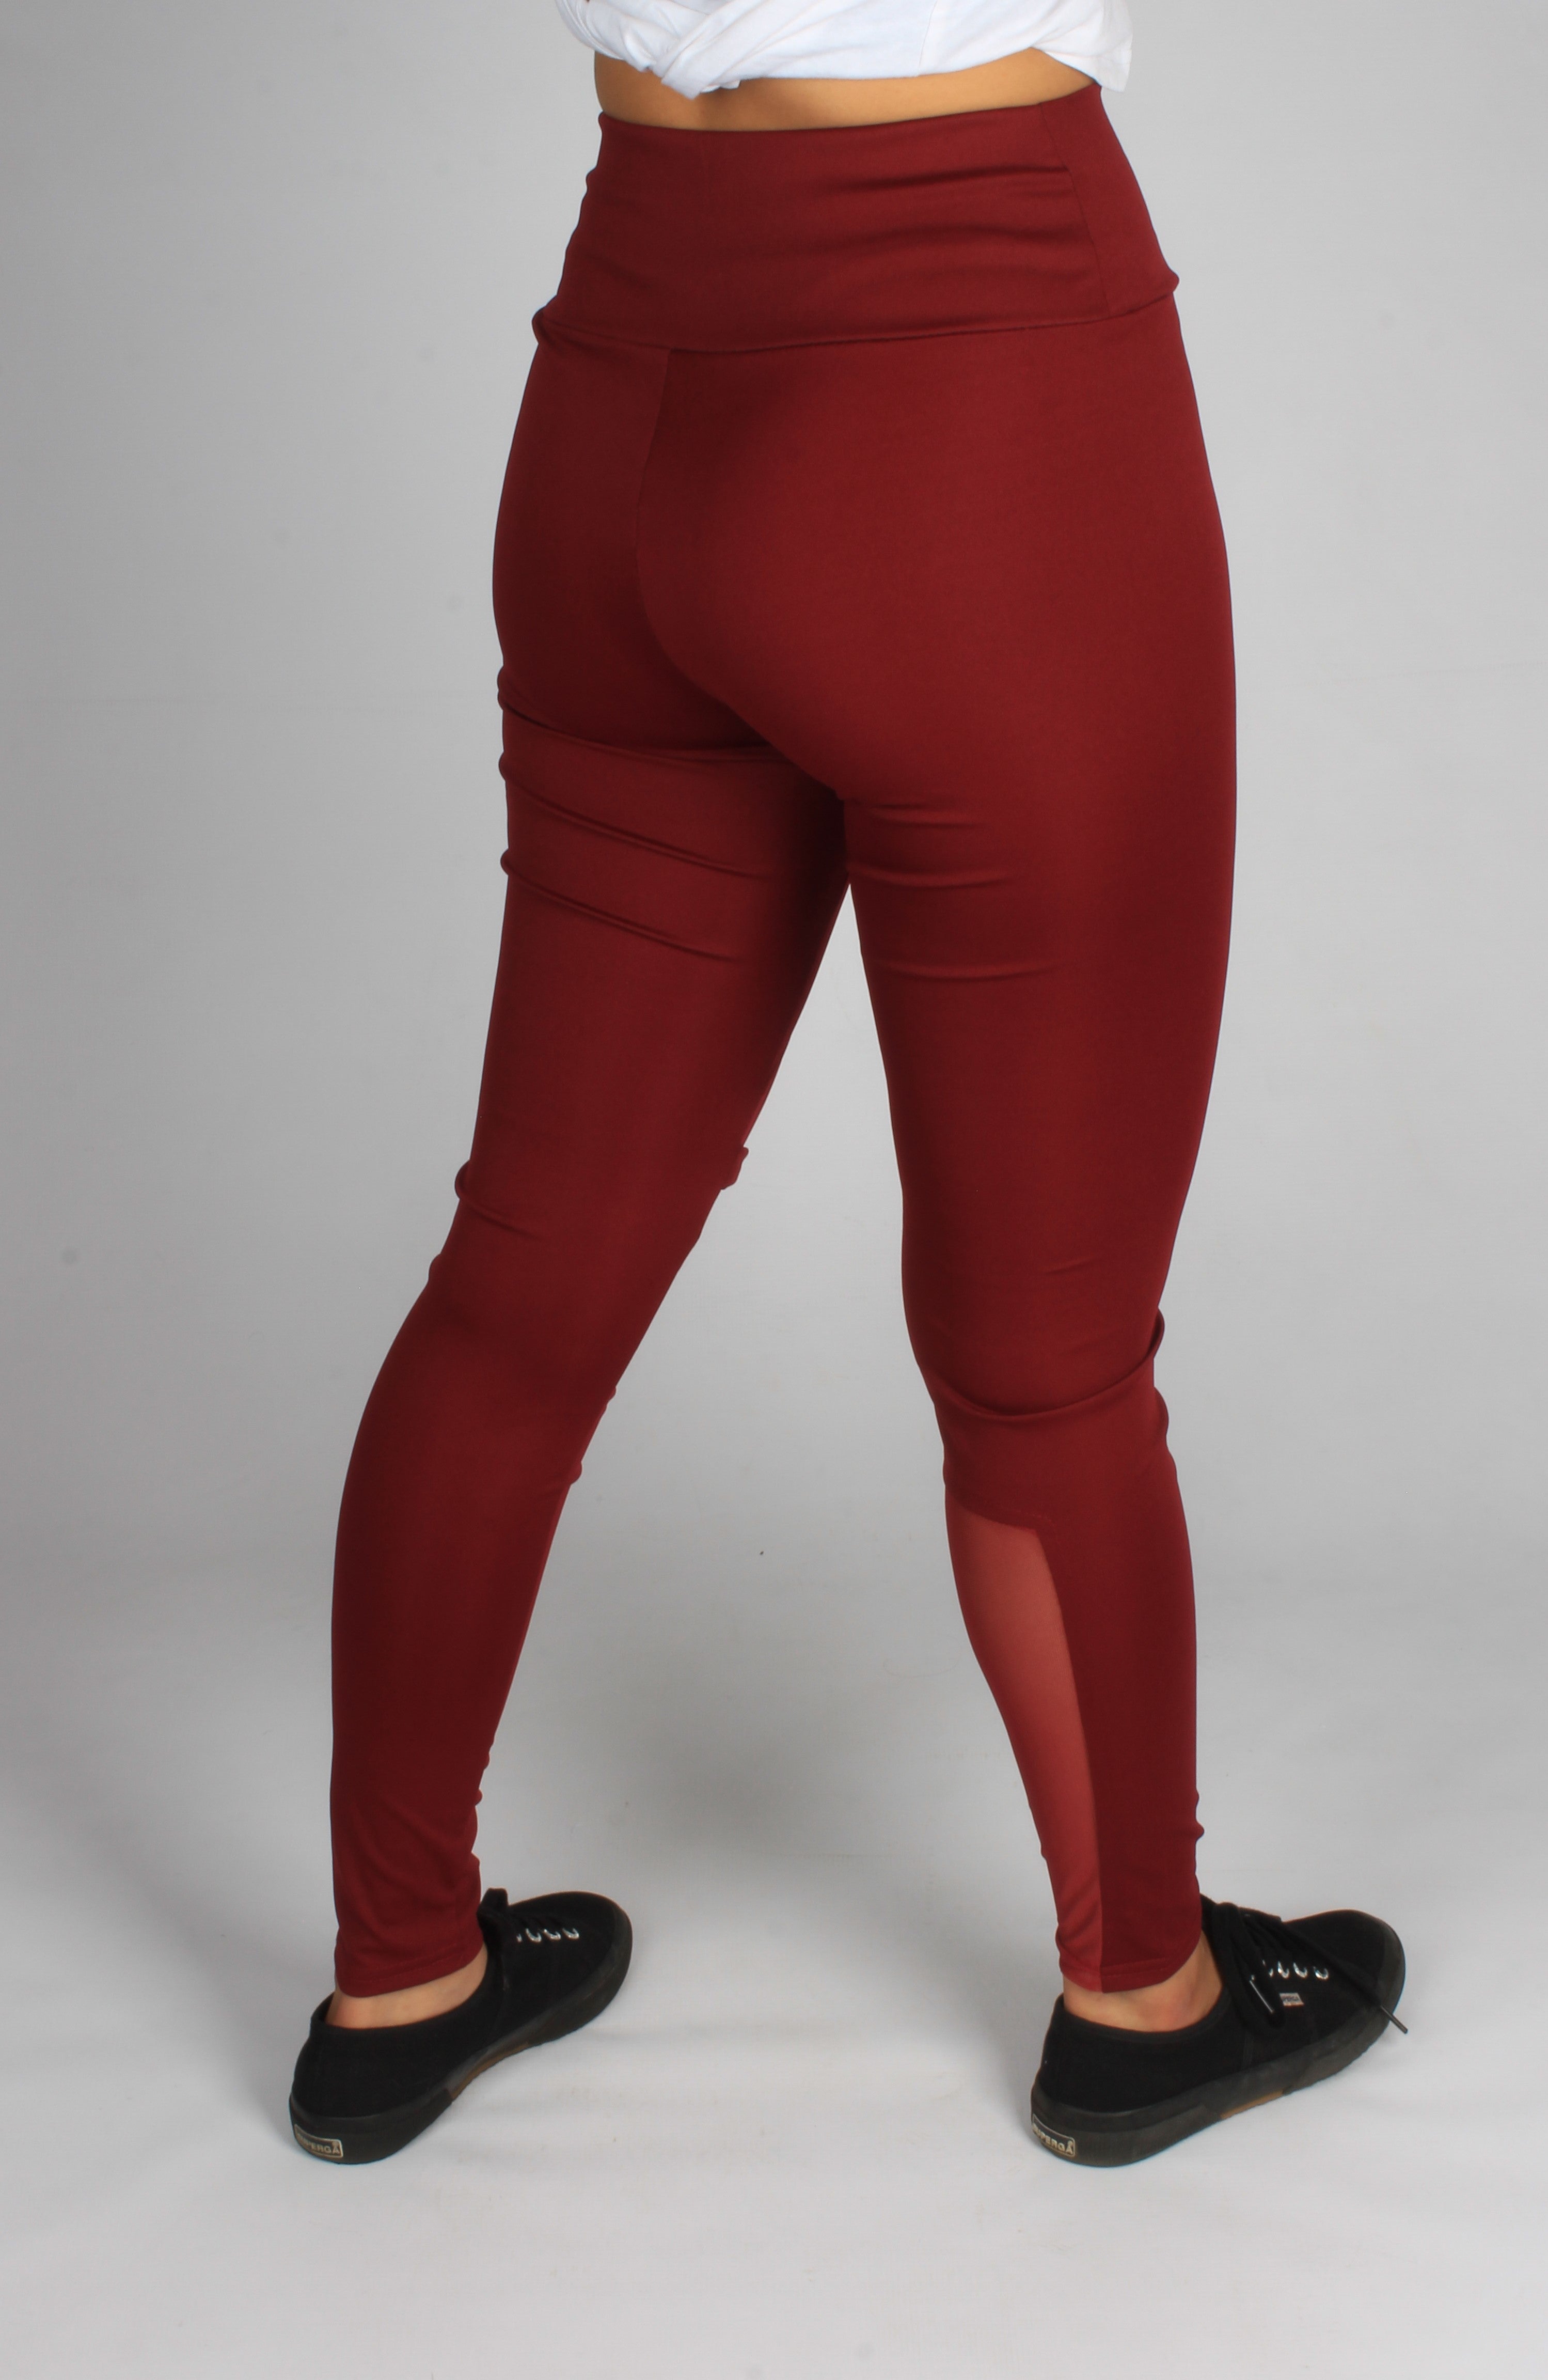 Training Long Exercise Gym Tights